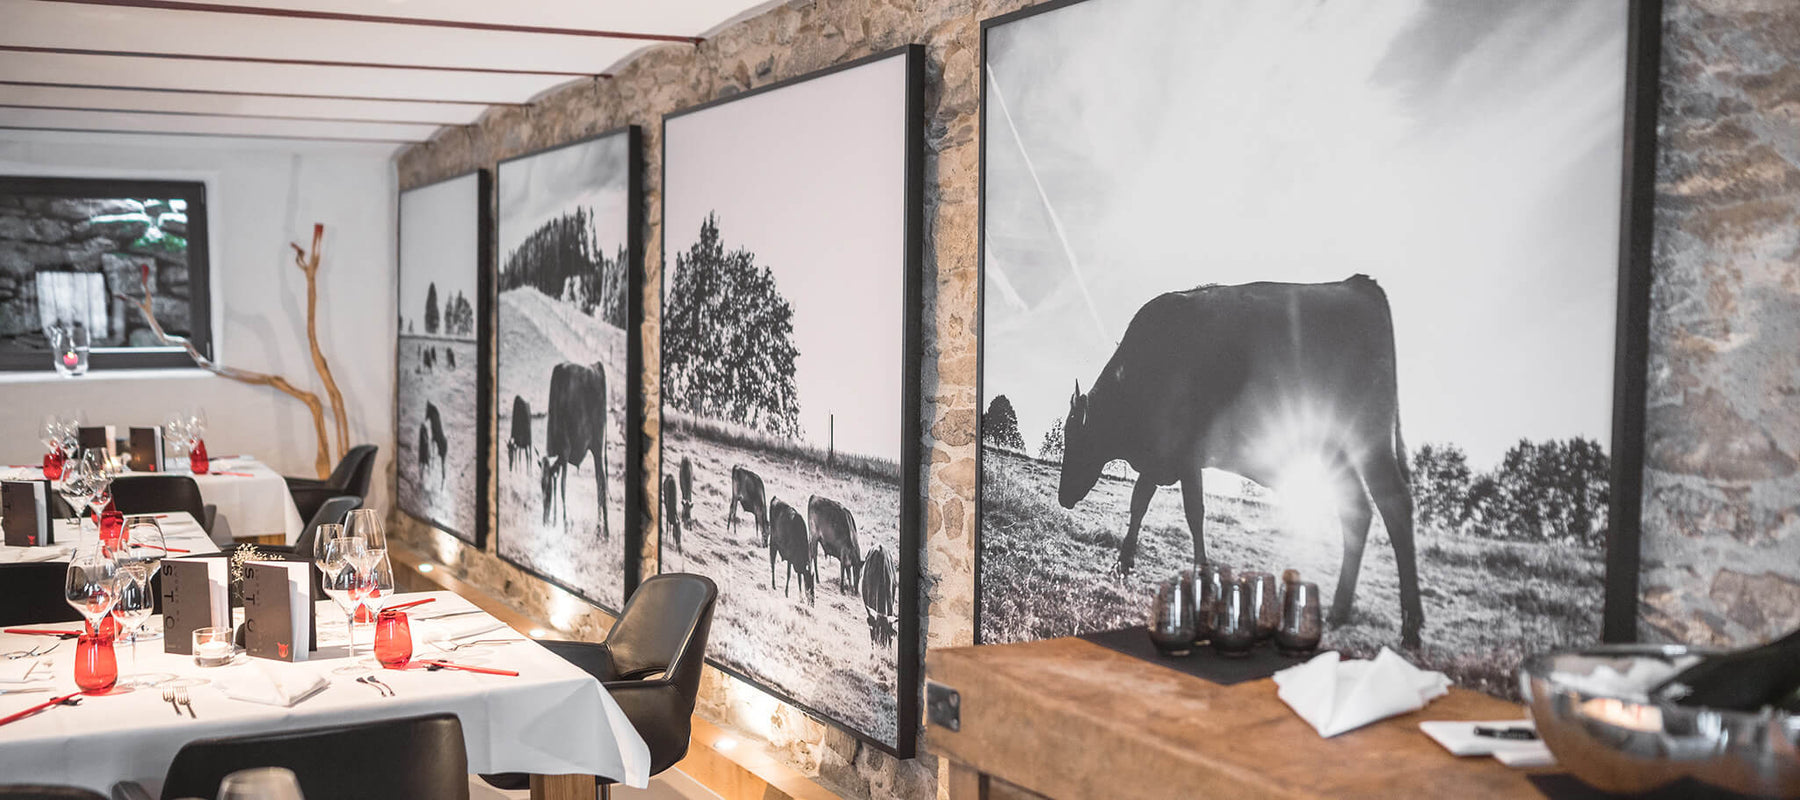 image of a resturant with lots of sound proof wall decoration images with buffalo portrait